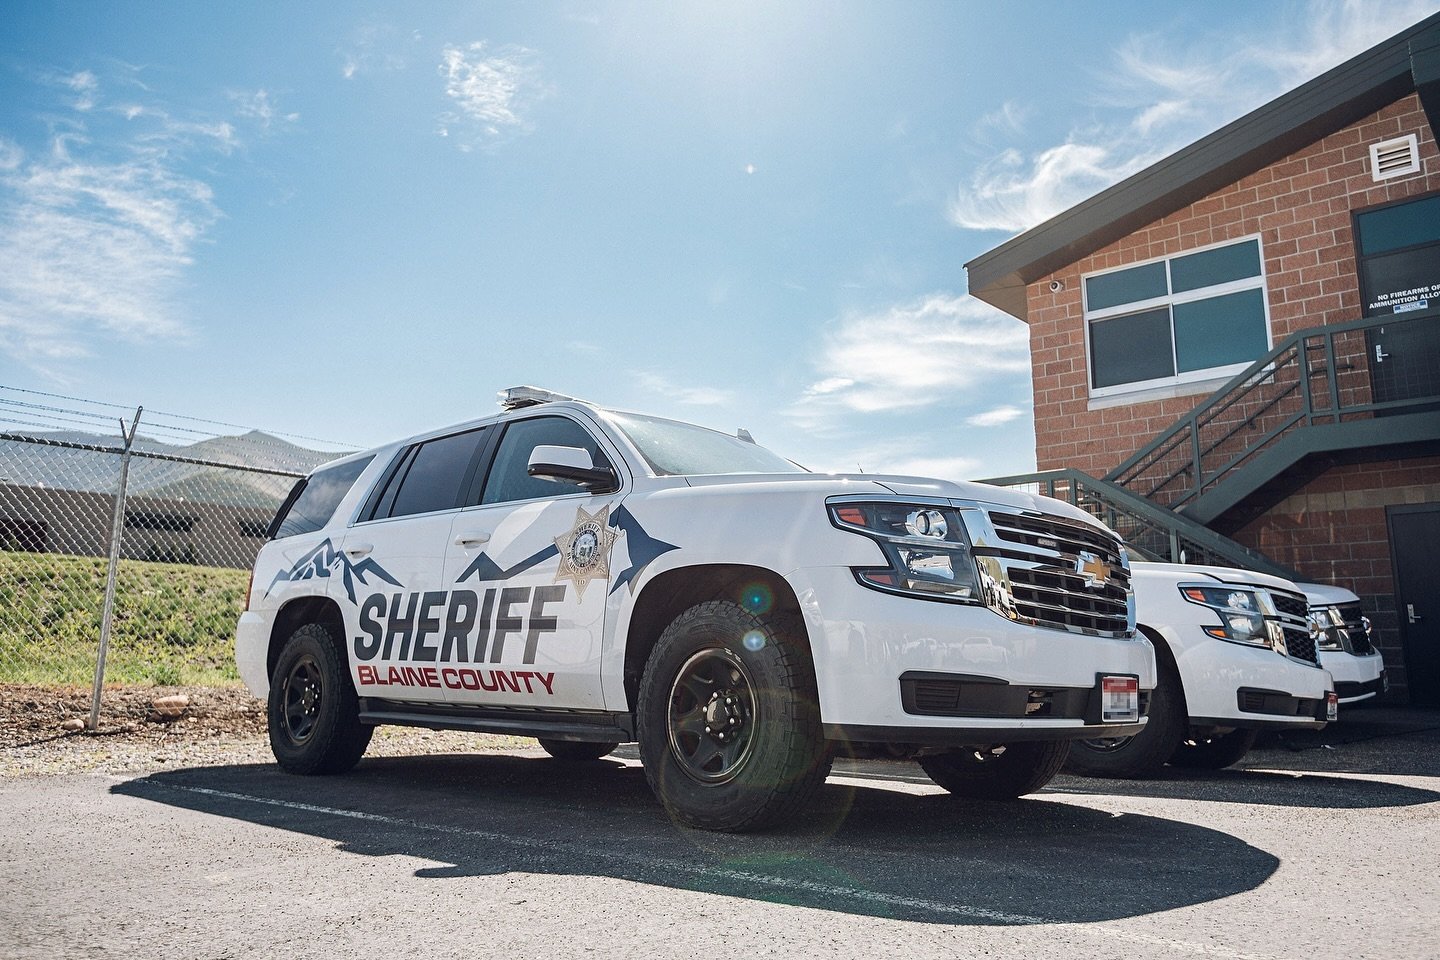 Vehicle wrap design for the sheriff&rsquo;s department in Blaine County, Idaho. Two things &ndash; 1) Shoutout to the Sheriff&rsquo;s Dept for giving us a tour of their facility + fleet. It&rsquo;s quite the fleet and y&rsquo;all were super friendly!